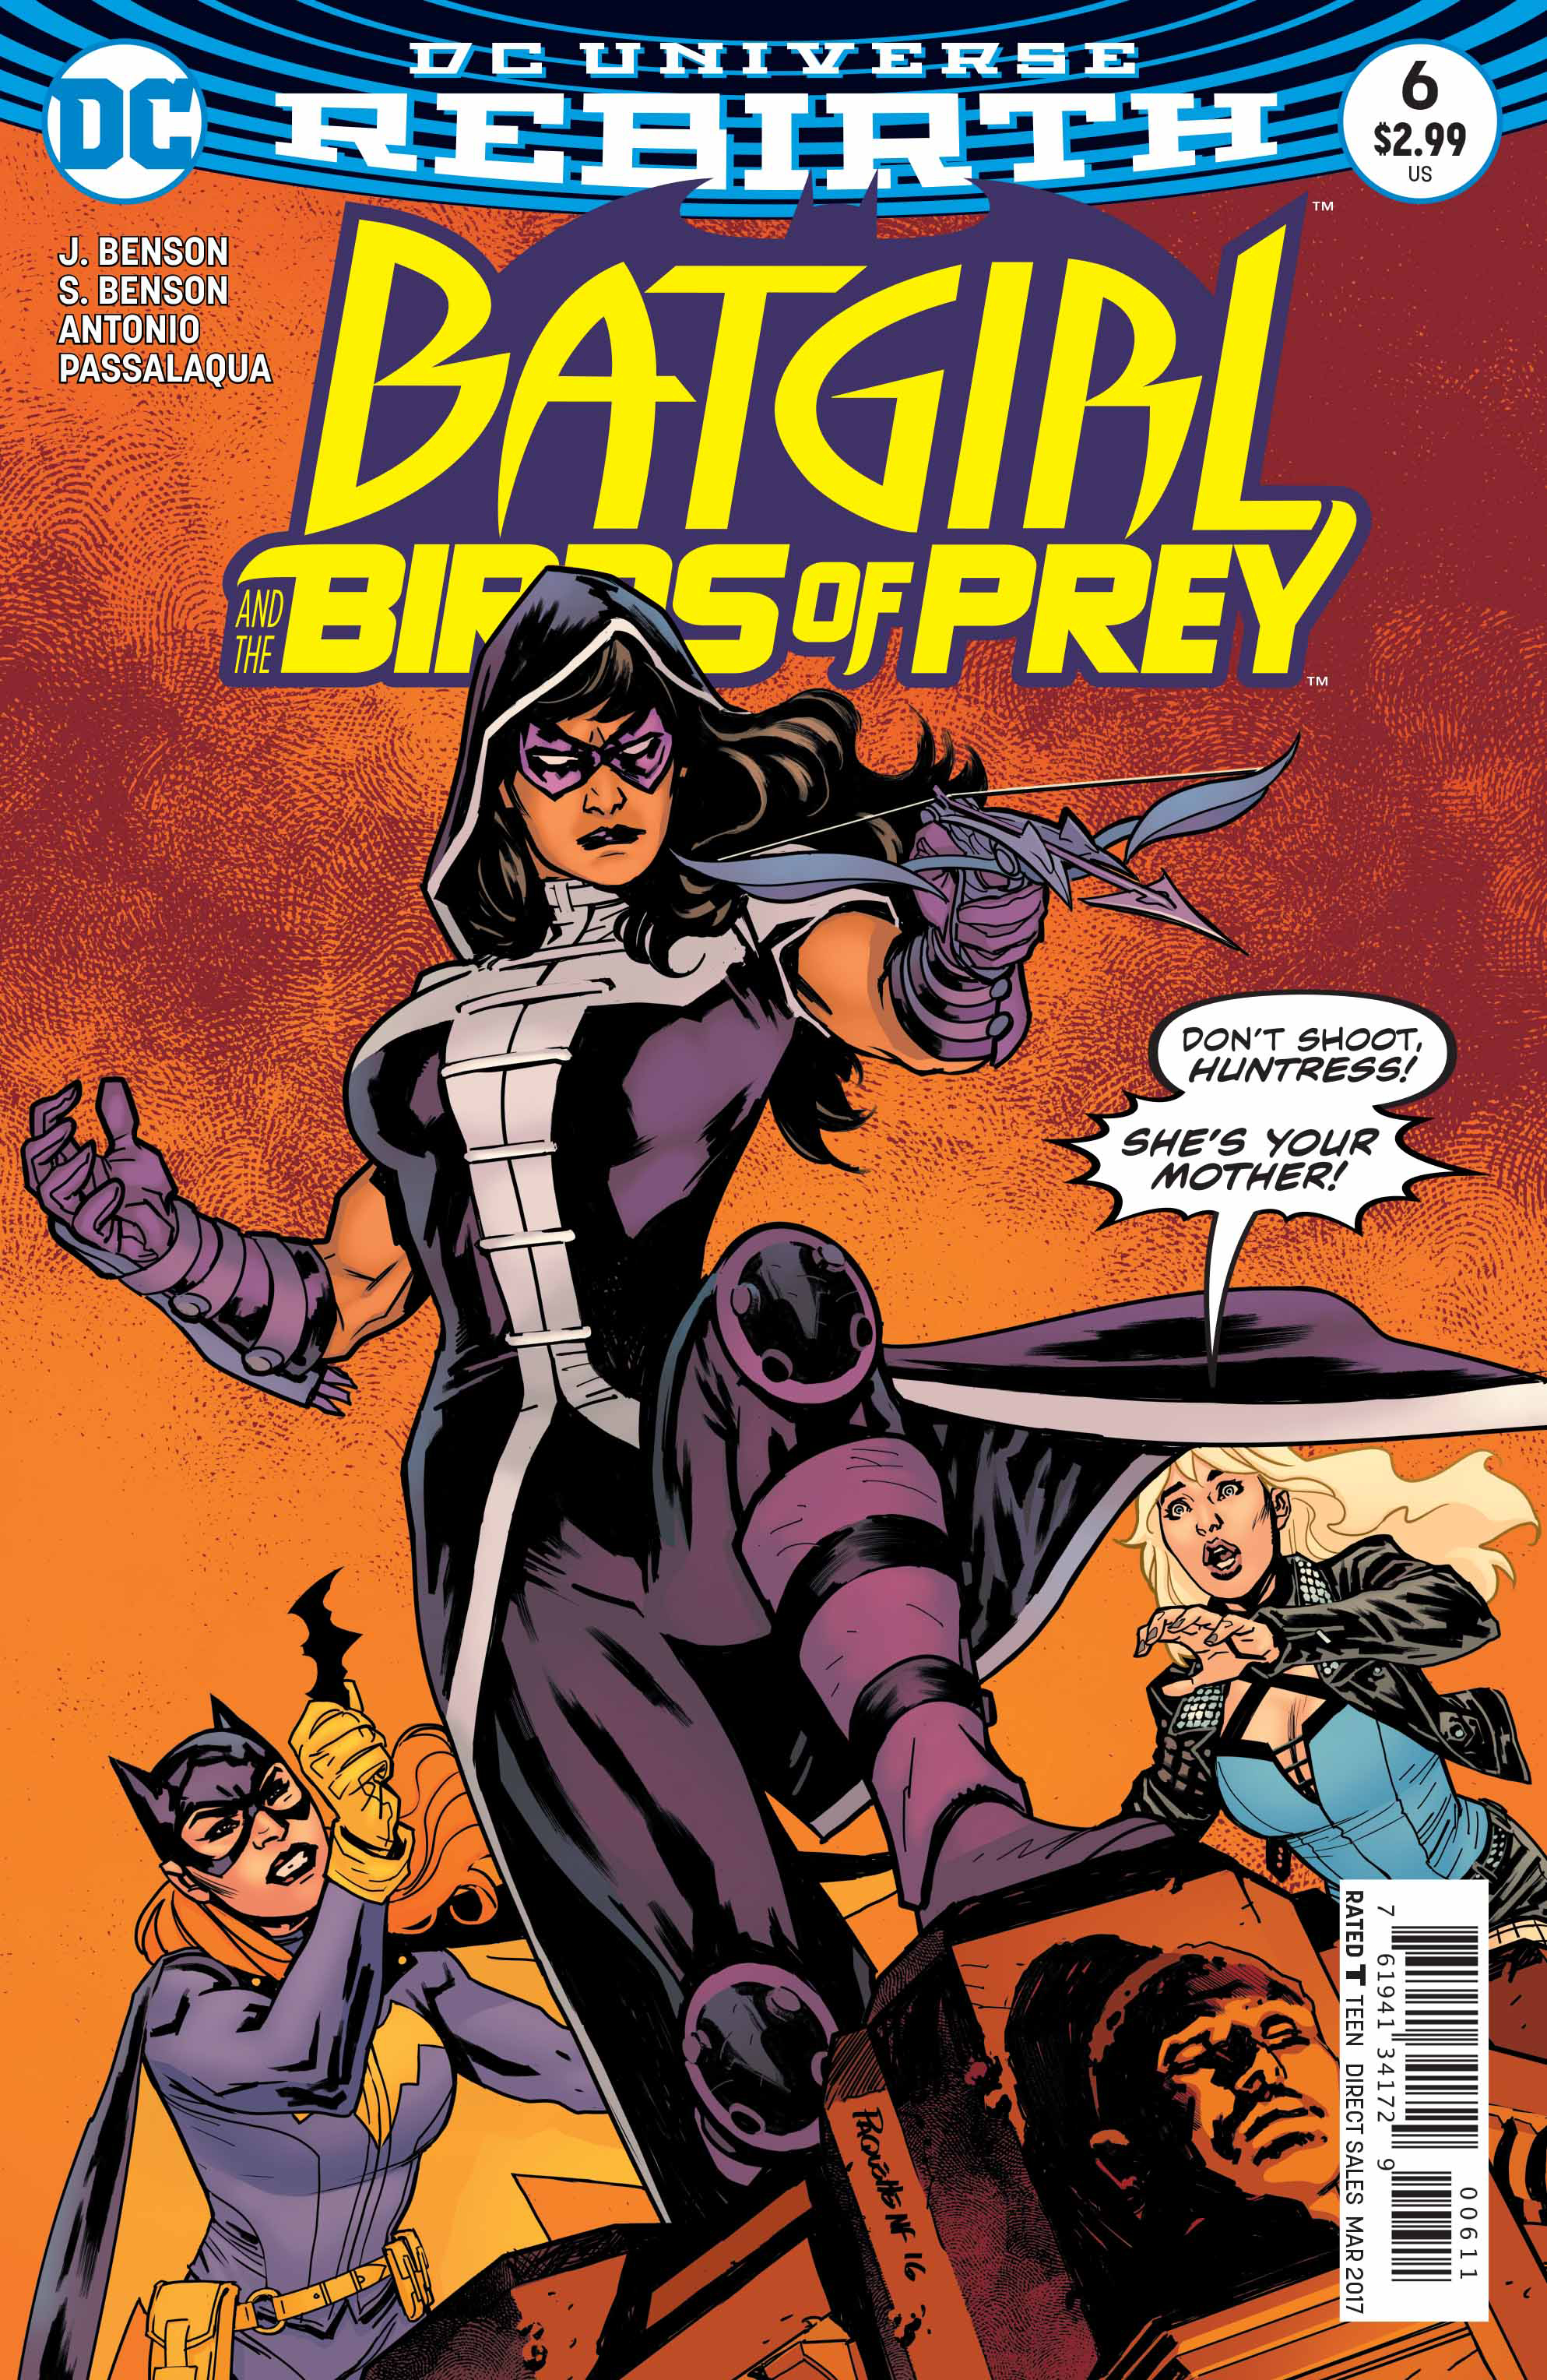 BATGIRL AND THE BIRDS OF PREY #6